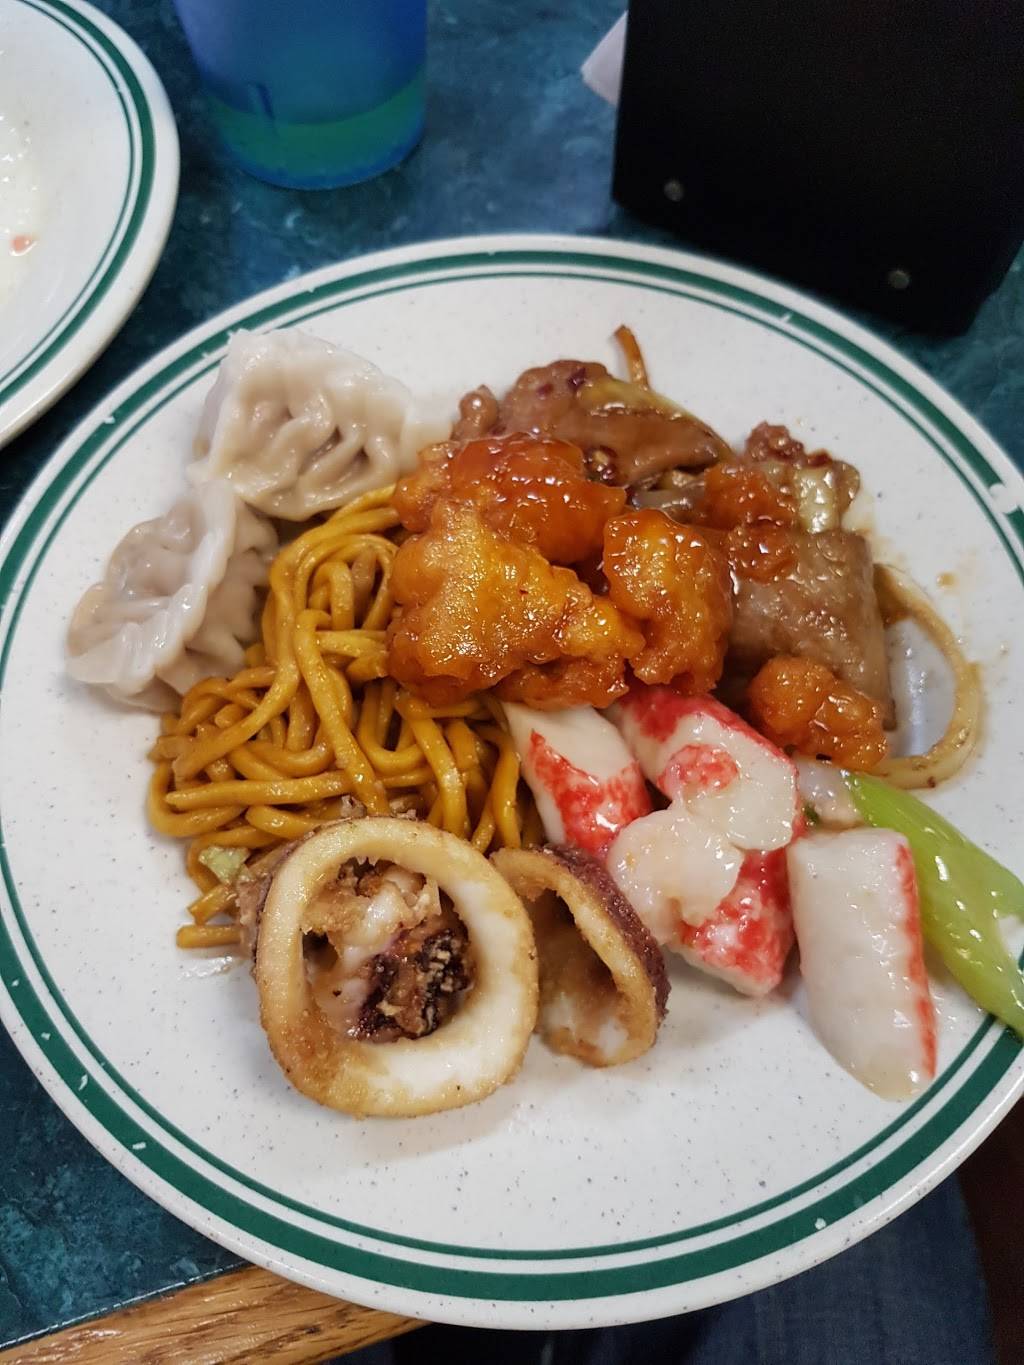 New China Buffet | restaurant | 1500 Torrence Ave, Calumet City, IL 60409, USA | 7088686180 OR +1 708-868-6180